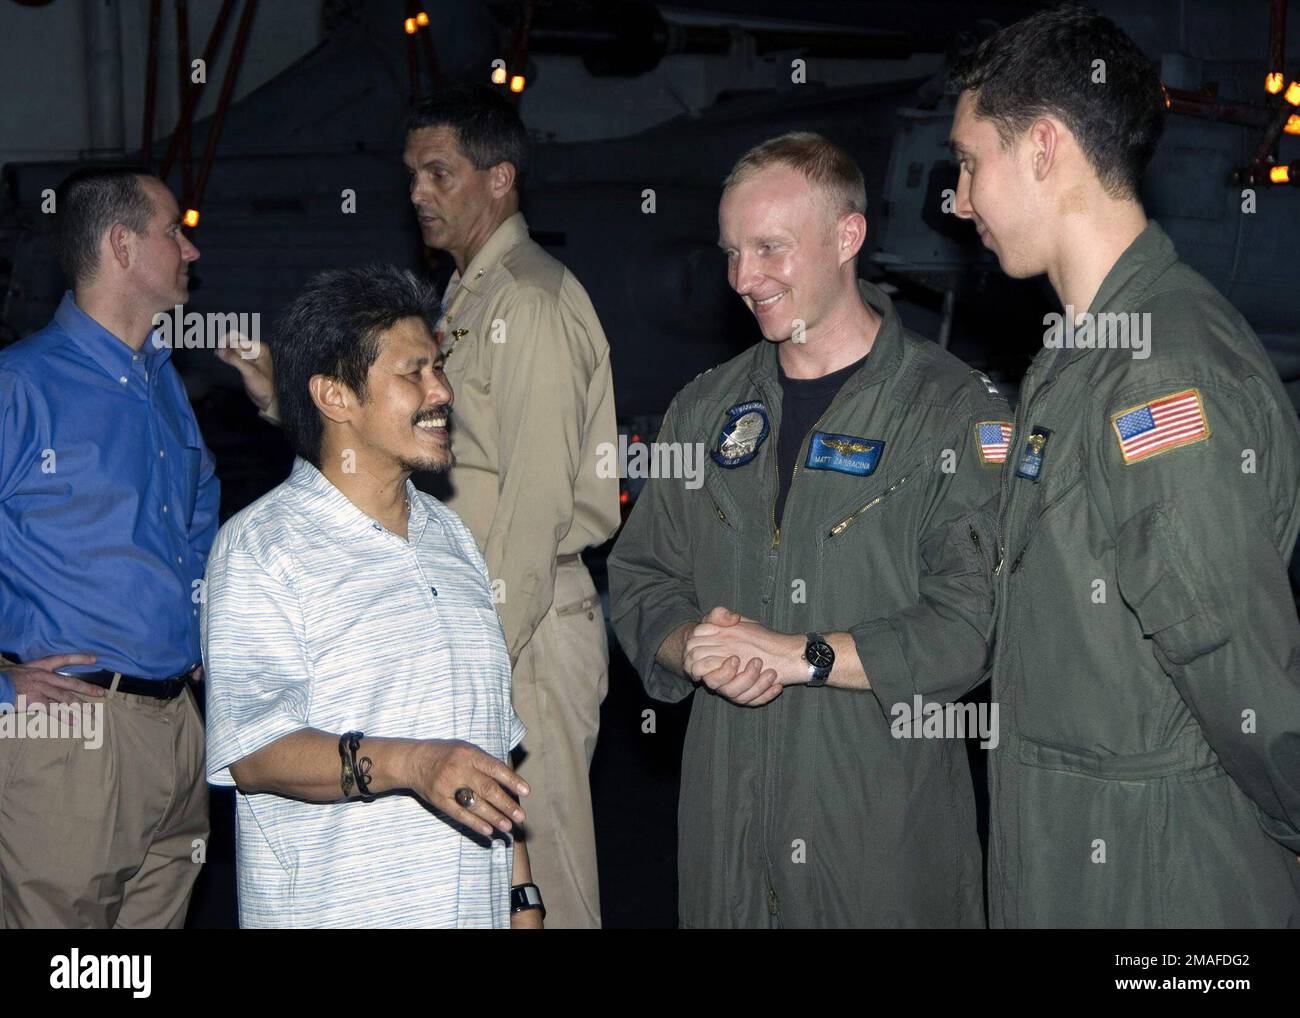 060509-N-9898L-021. [Complete] Scene Caption: His Royal Highness, Prince Mohamed, Foreign Minister of Brunei, and Charge D'Affaires of Brunei Jeff Hawkins (far left), meet the US Navy (USN) Nimitz-class aircraft carrier USS ABRAHAM LINCOLN (CVN 72), Executive Officer (XO), Captain (CAPT) D. A. Lausman and members of Helicopter Anti-Submarine Squadron Light 47 (HSL-47) while on a tour of the ship.2006) - His Royal HighnessPrince MohamedForeign Minister of Bruneiand Jeff HawkinsCharge D'Affaires of Brunei meet USS Abraham Lincoln s (CVN 72) Executive OfficerCAPT. D. A. Lausmanand members of Heli Stock Photo